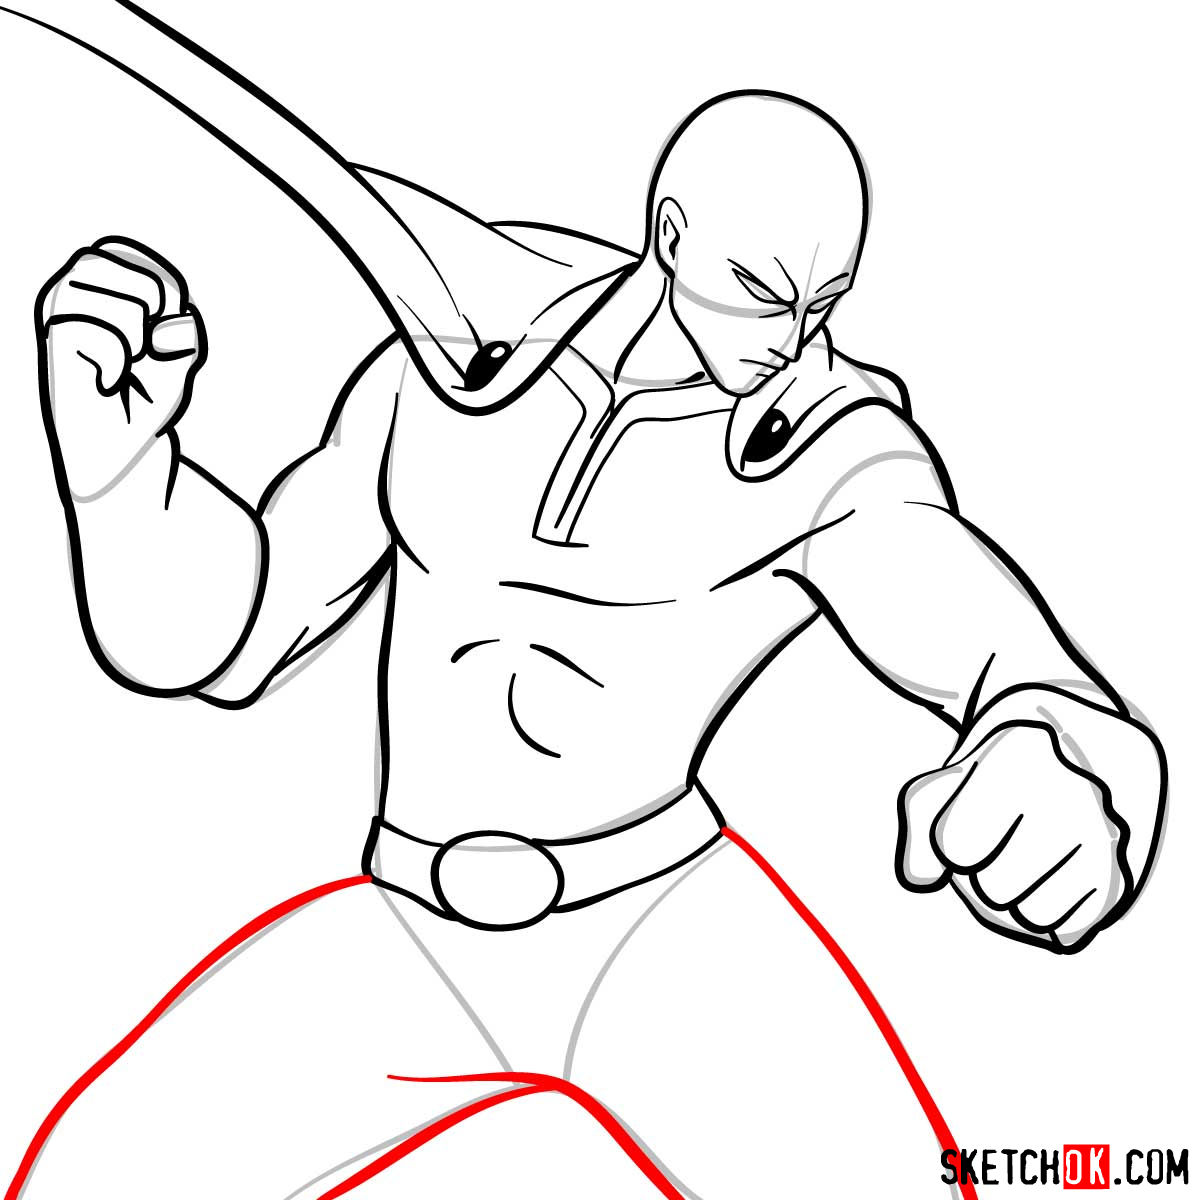 How to draw fighting Saitama in 12 steps - step 11